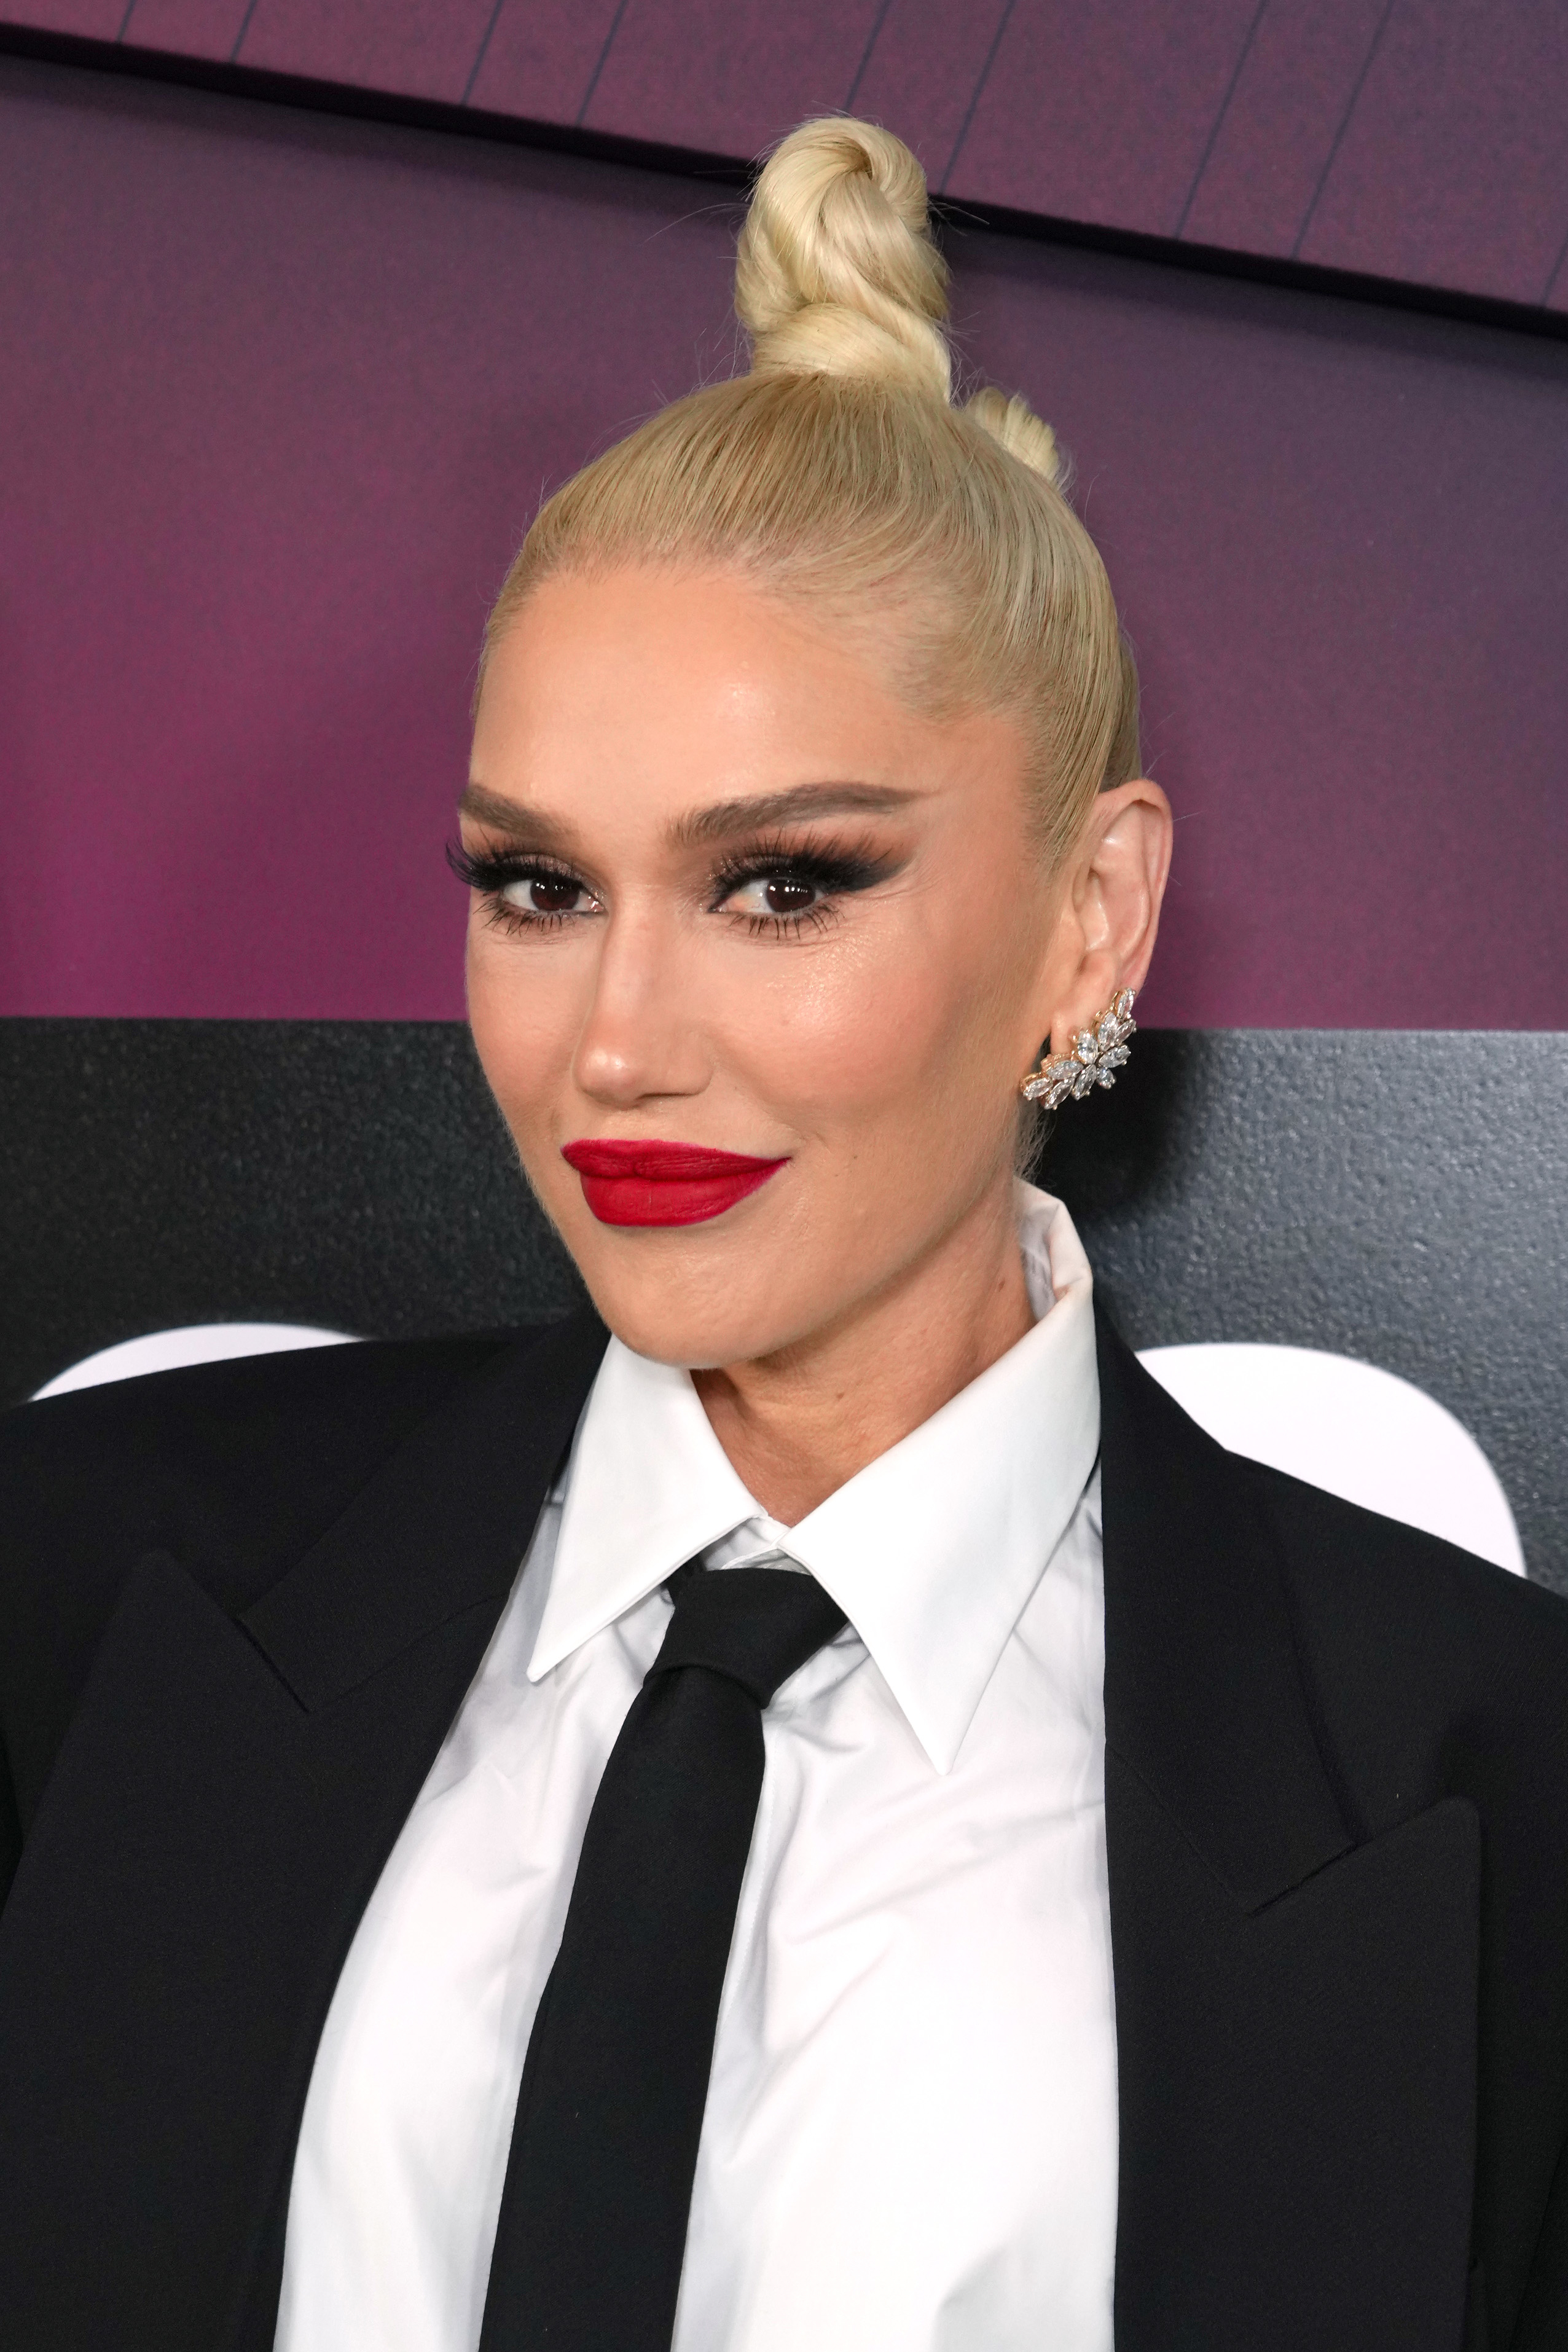 Gwen Stefani wearing a suit with a white shirt, black tie, and top bun hairstyle